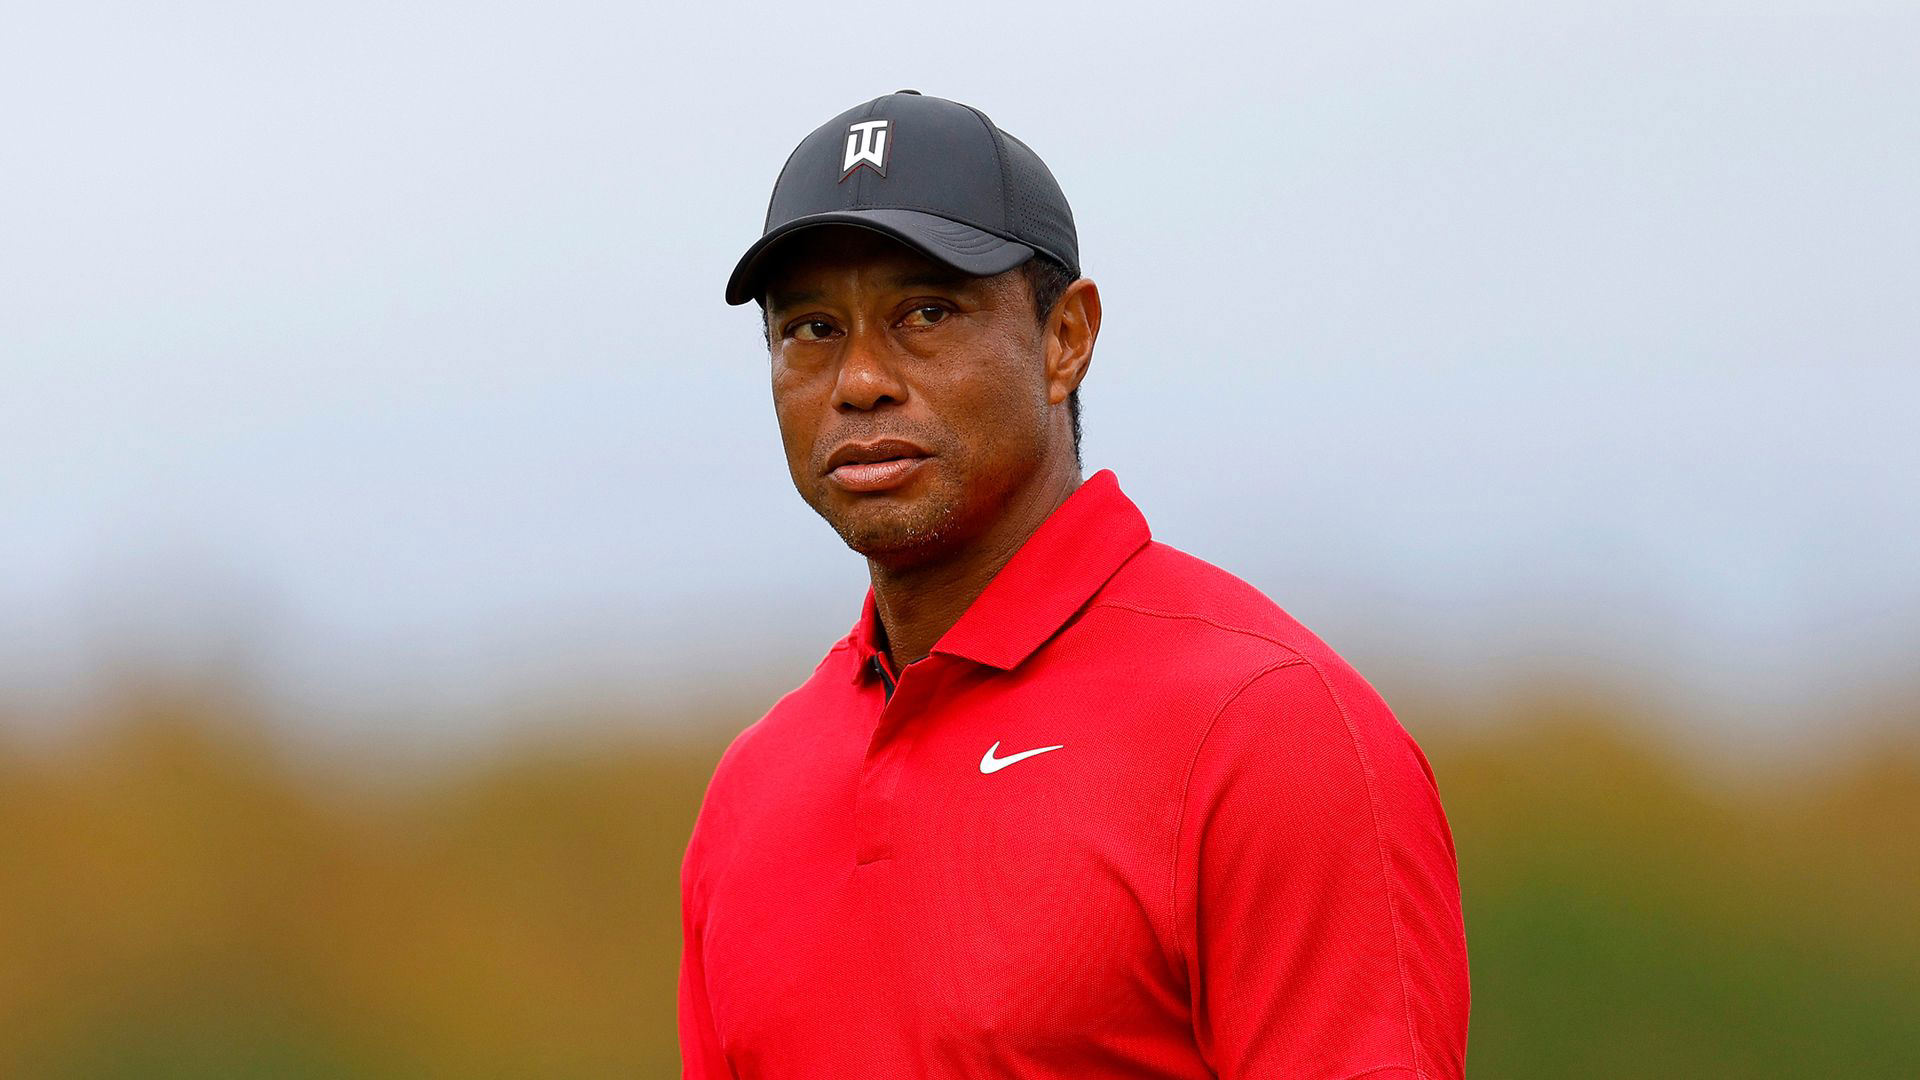 Tiger Woods And TaylorMade Planning To Launch New Golf Brand With An ...